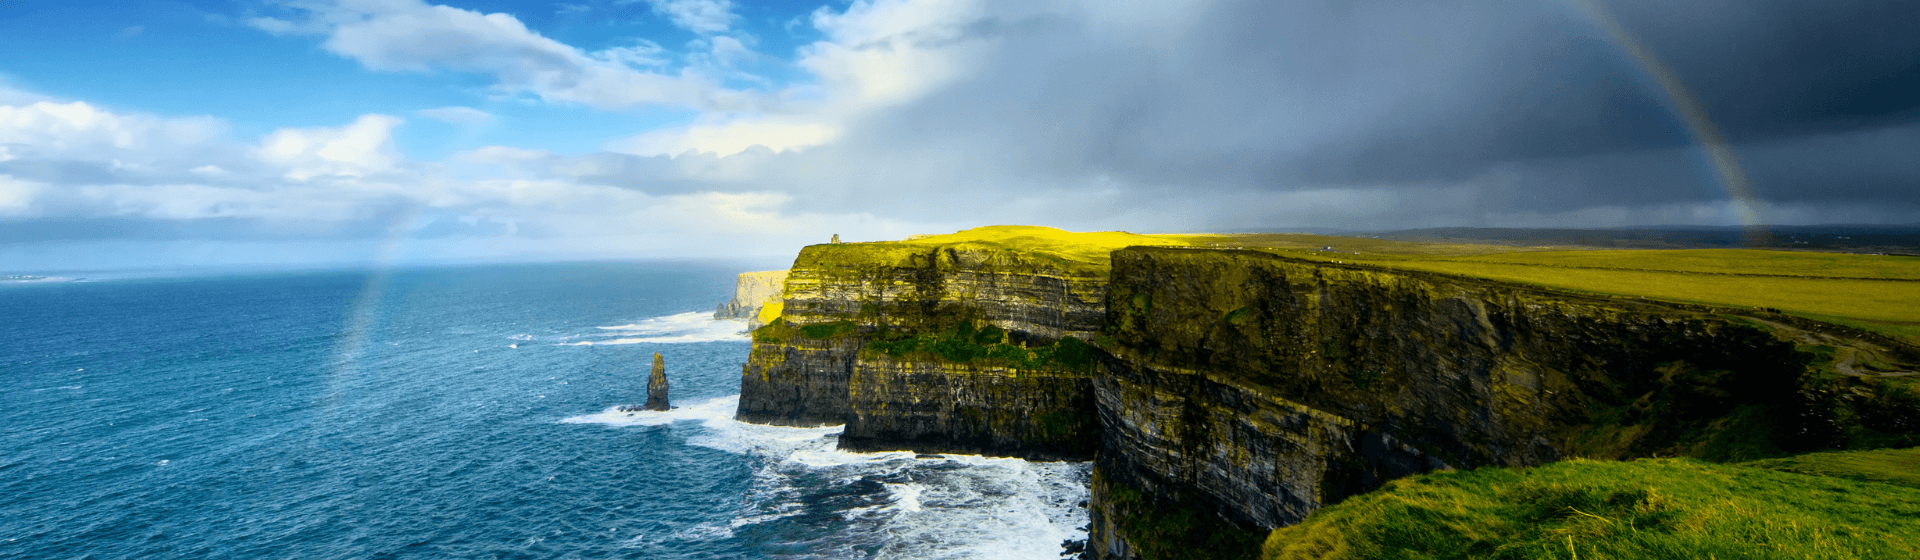 Things to do near Cliffs of Moher